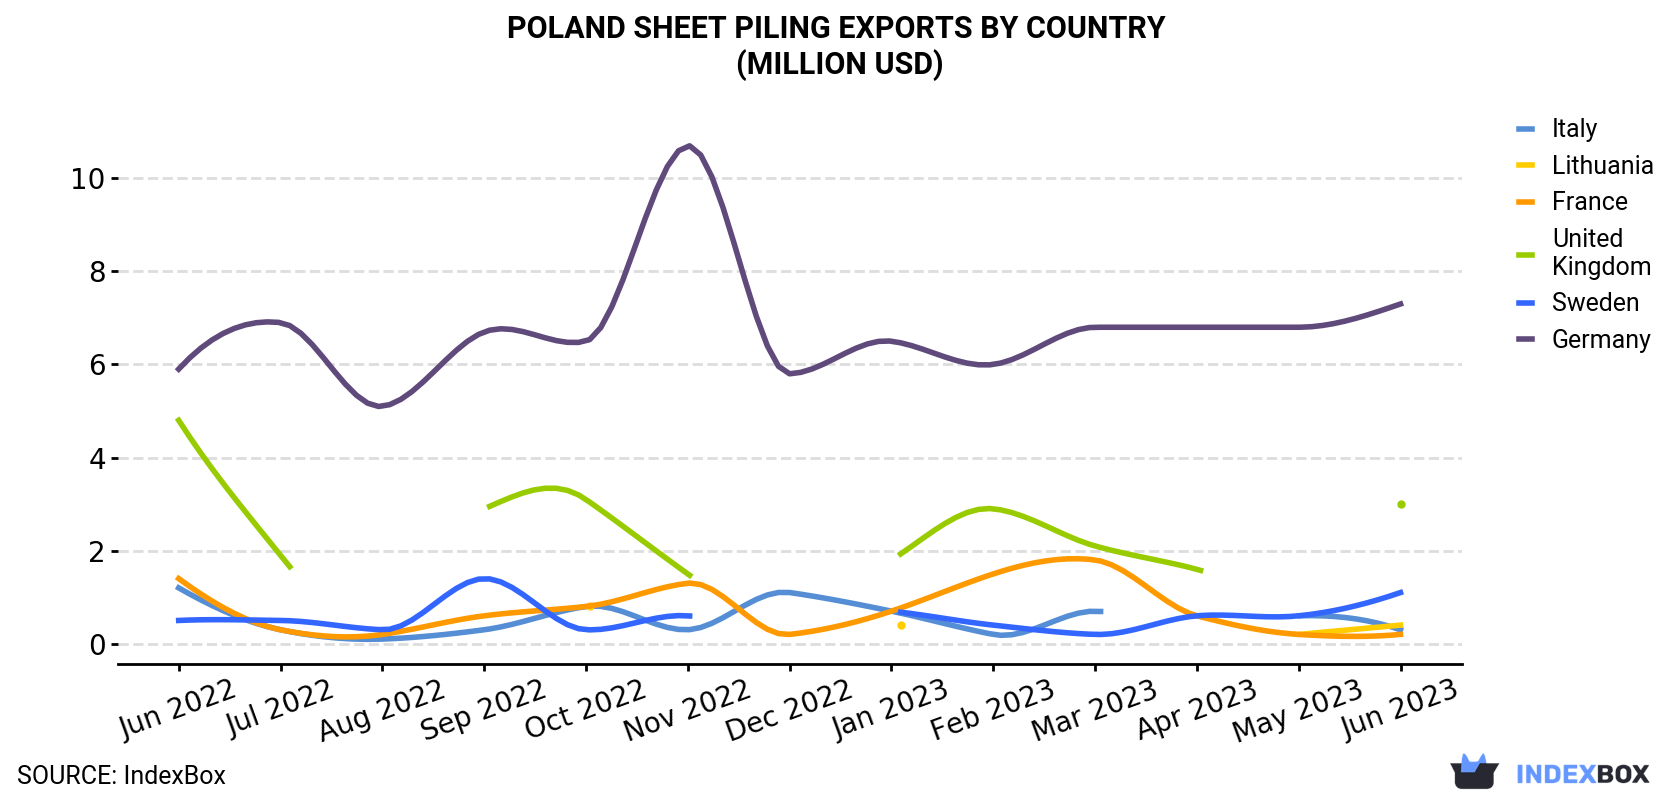 Poland Sheet Piling Exports By Country (Million USD)